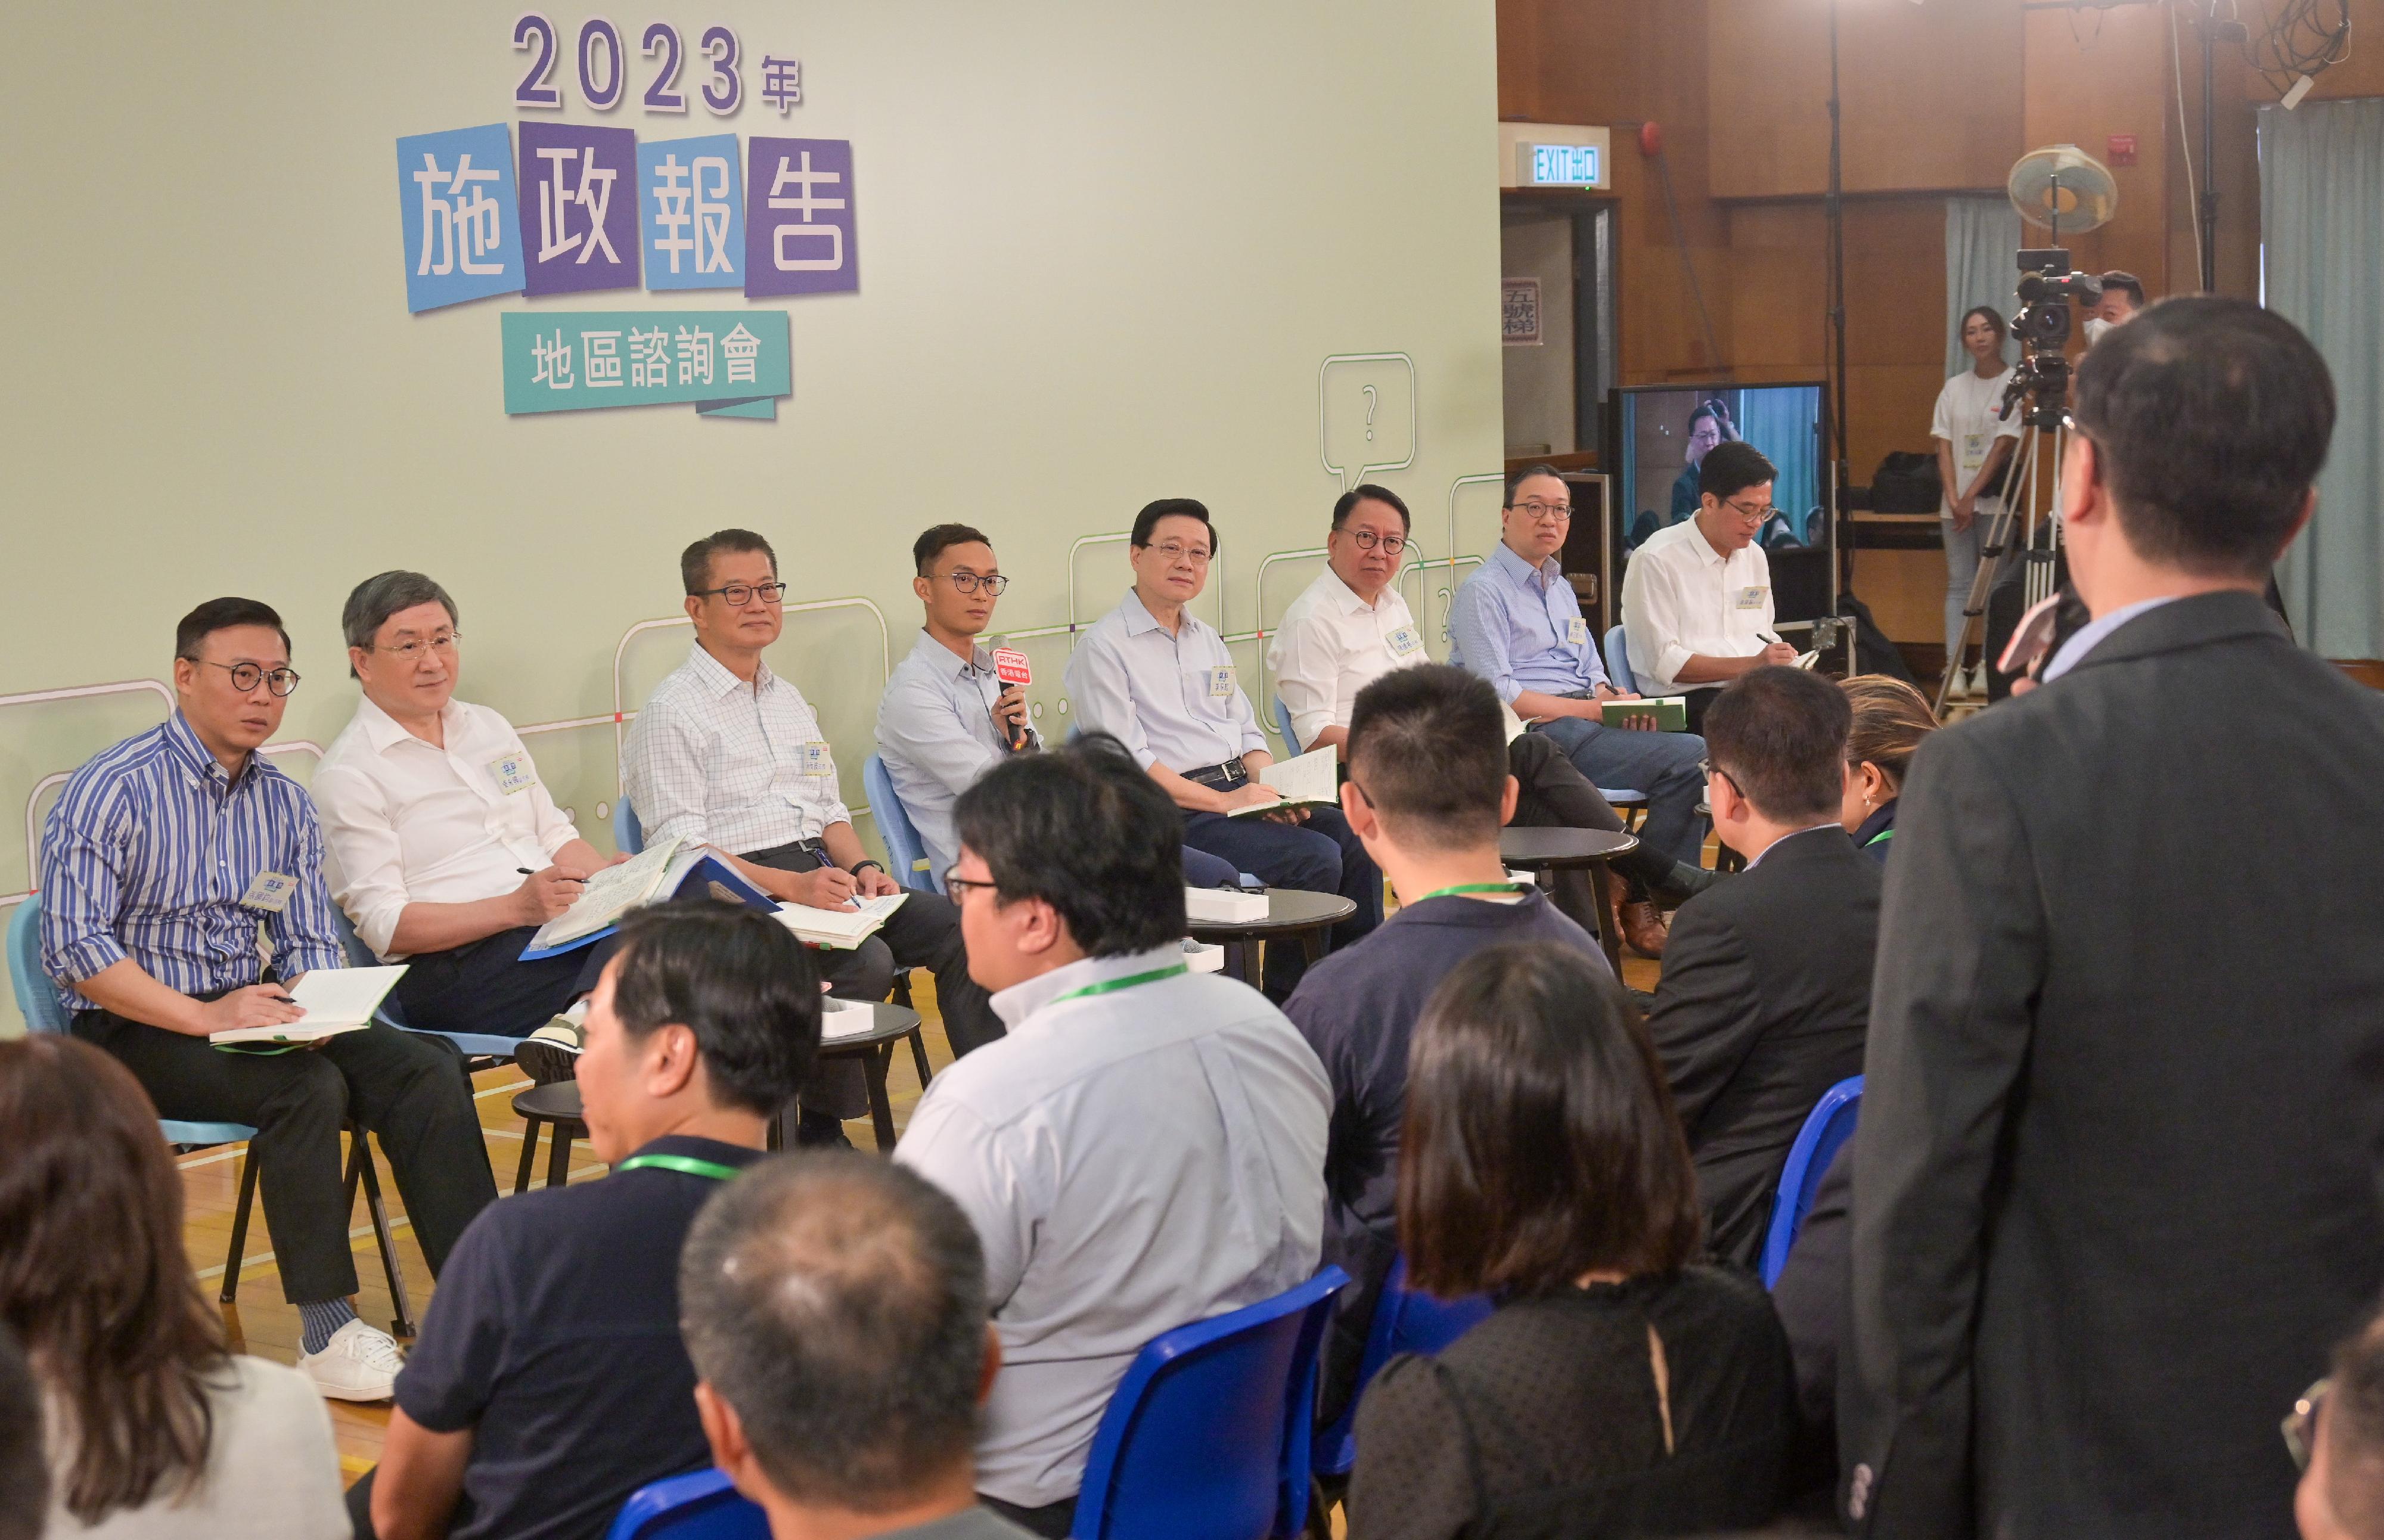 The Chief Executive, Mr John Lee, attended the 2023 Policy Address District Forum with some Principal Officials this morning (August 20) to listen to views and suggestions of local community members on the upcoming Policy Address. Photo shows Mr Lee (fourth right); the Chief Secretary for Administration, Mr Chan Kwok-ki (third right); the Financial Secretary, Mr Paul Chan (third left); the Secretary for Justice, Mr Paul Lam, SC (second right); the Deputy Chief Secretary for Administration, Mr Cheuk Wing-hing (second left); the Deputy Financial Secretary, Mr Michael Wong (first right); and the Deputy Secretary for Justice, Mr Cheung Kwok-kwan (first left), listening to views of the public at the consultation session.